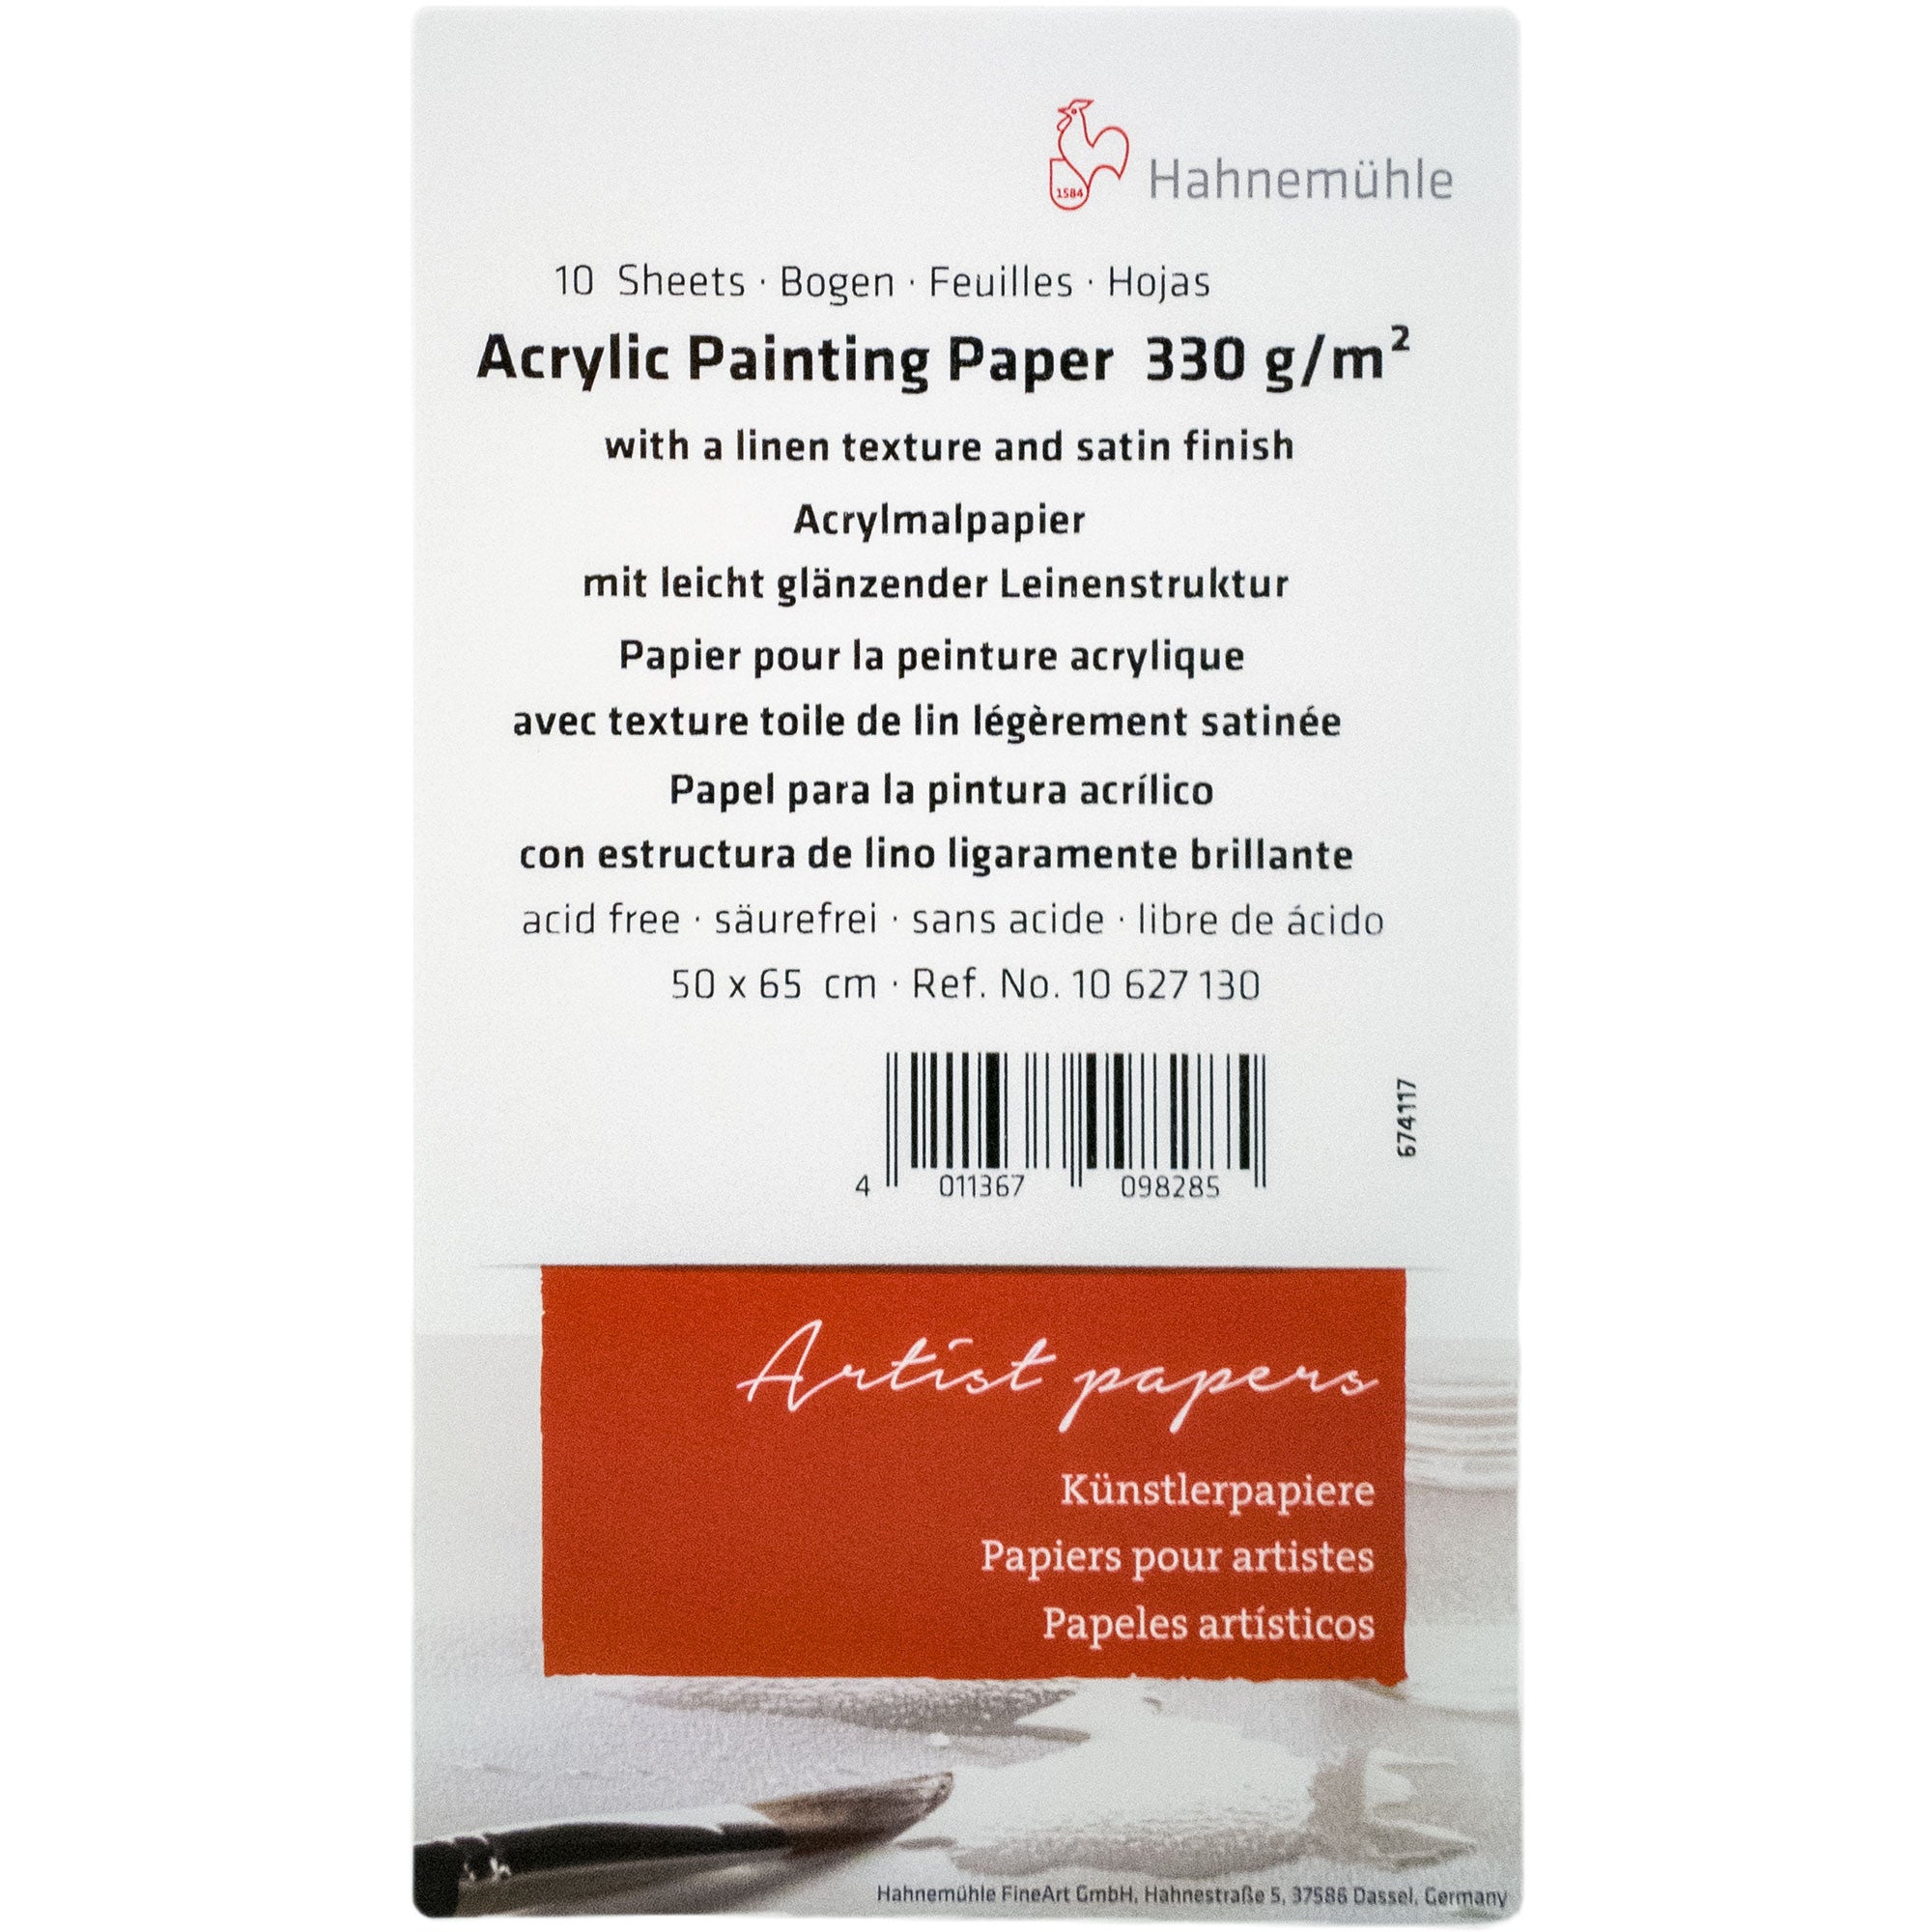 Hahnemühle Oil and Acrylic Paper Pads